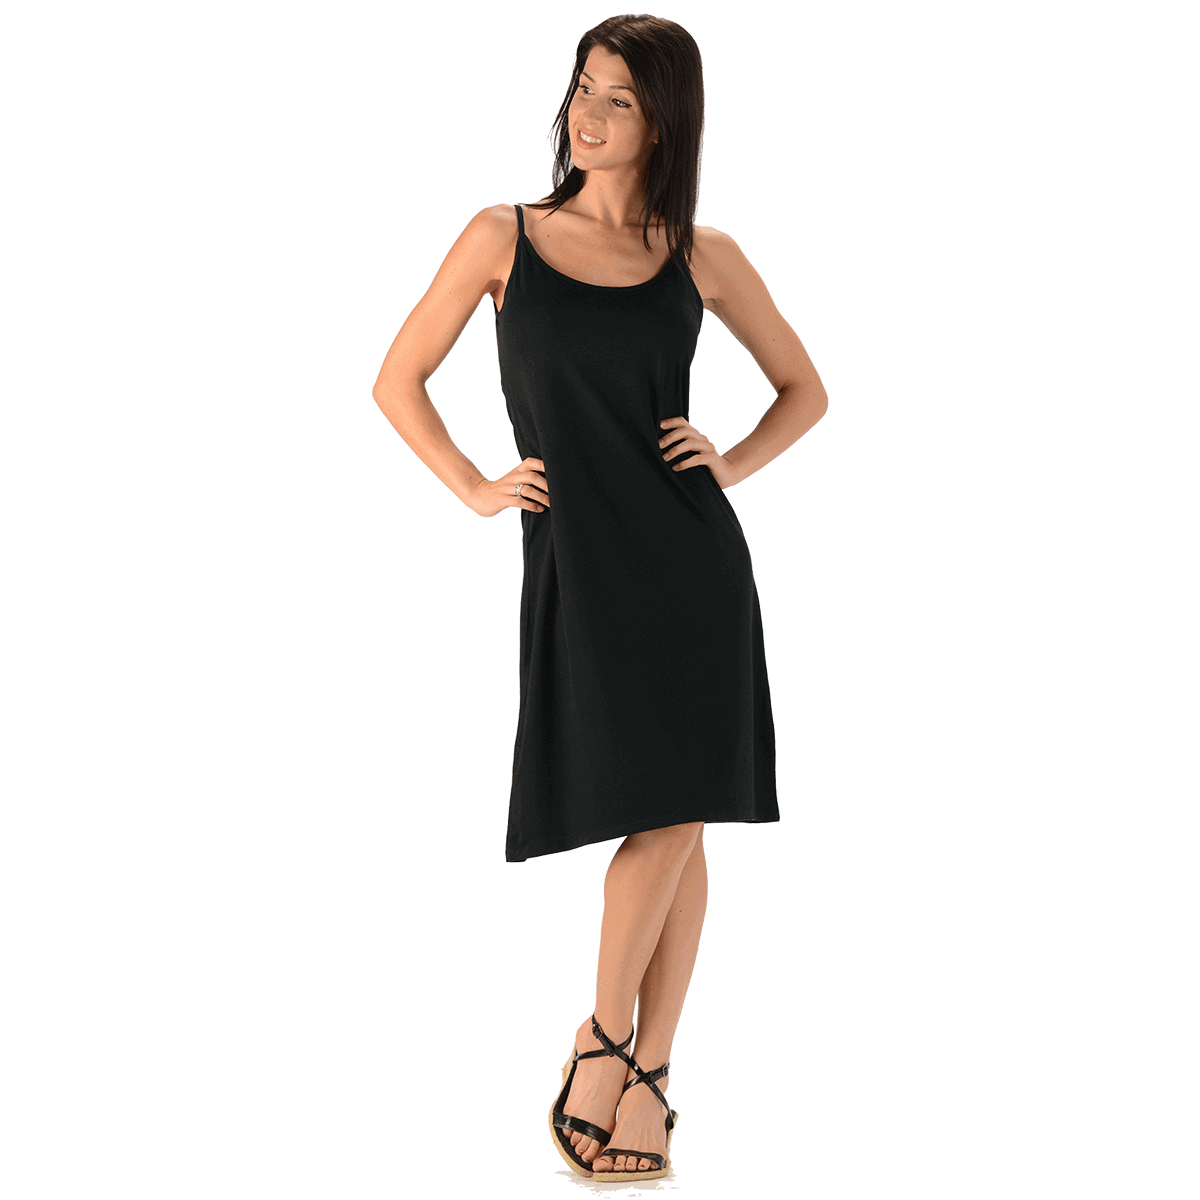 Going on vacation soon? This versatile bamboo dress can be dressed up or down for any occasion. 
eco-essentials.com/product/women-…
 #bamboo #bambooclothing #womensdress #vacationwear #cruisewear #beachwear #dress